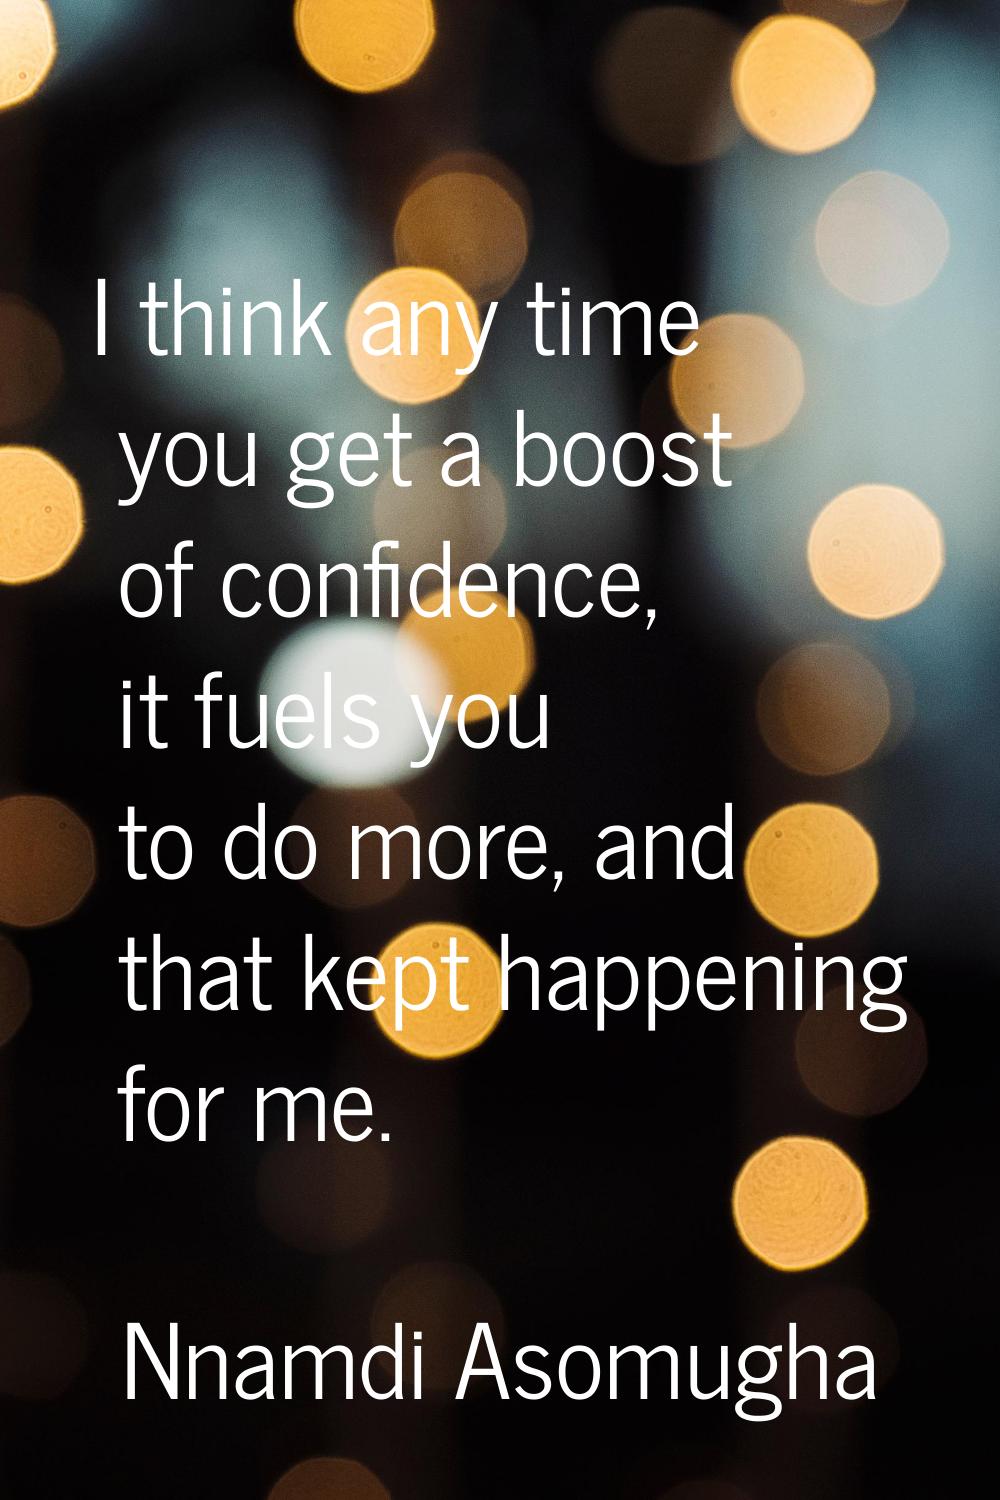 I think any time you get a boost of confidence, it fuels you to do more, and that kept happening fo